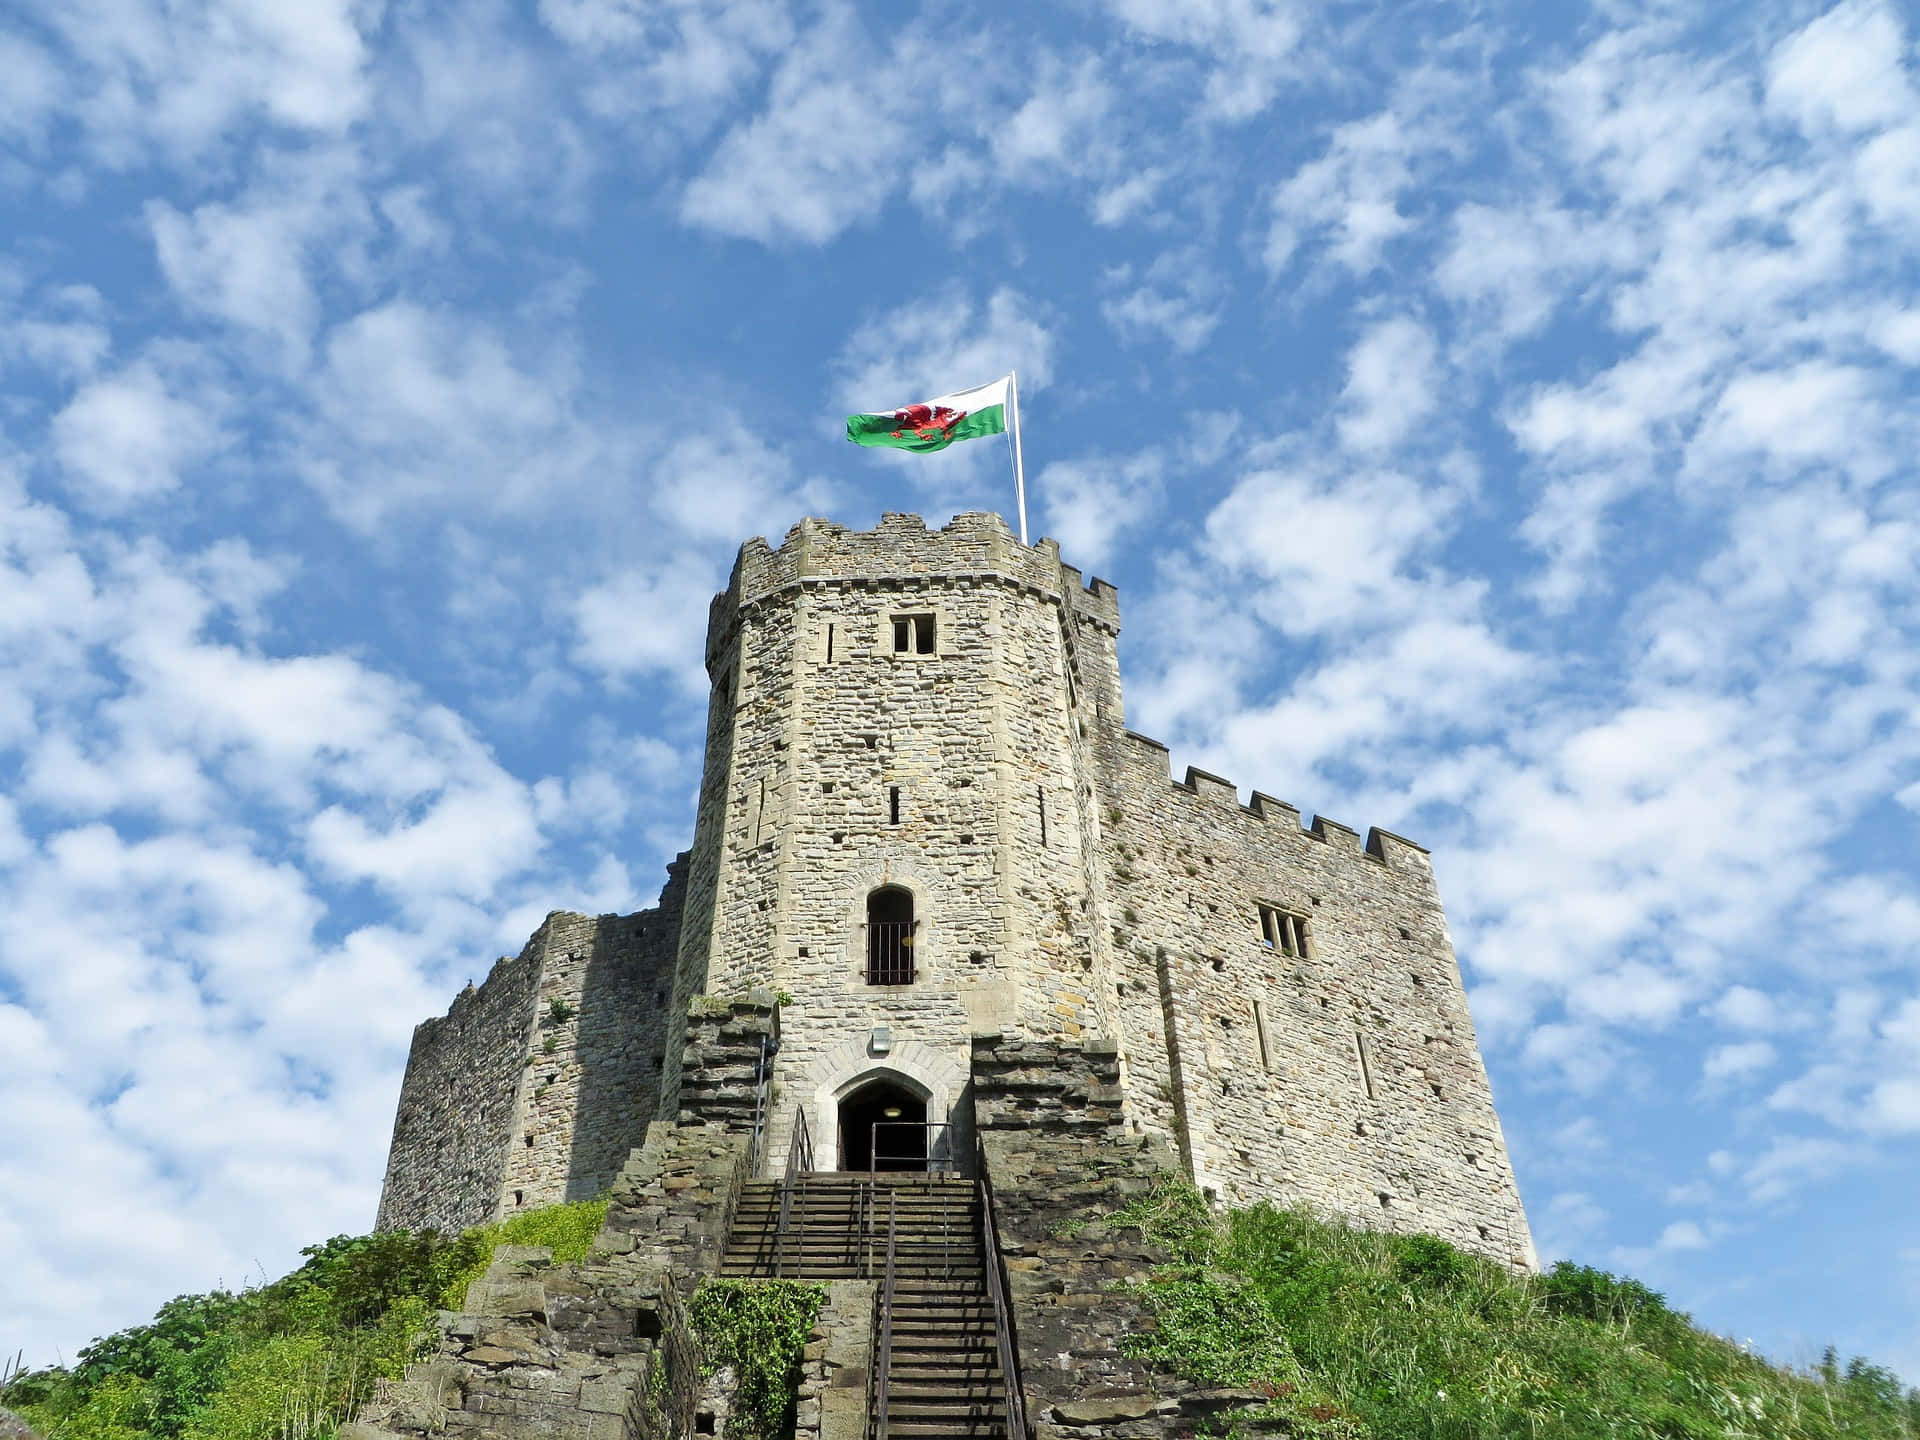 Cardiff Castle And Cloud Formation Wallpaper